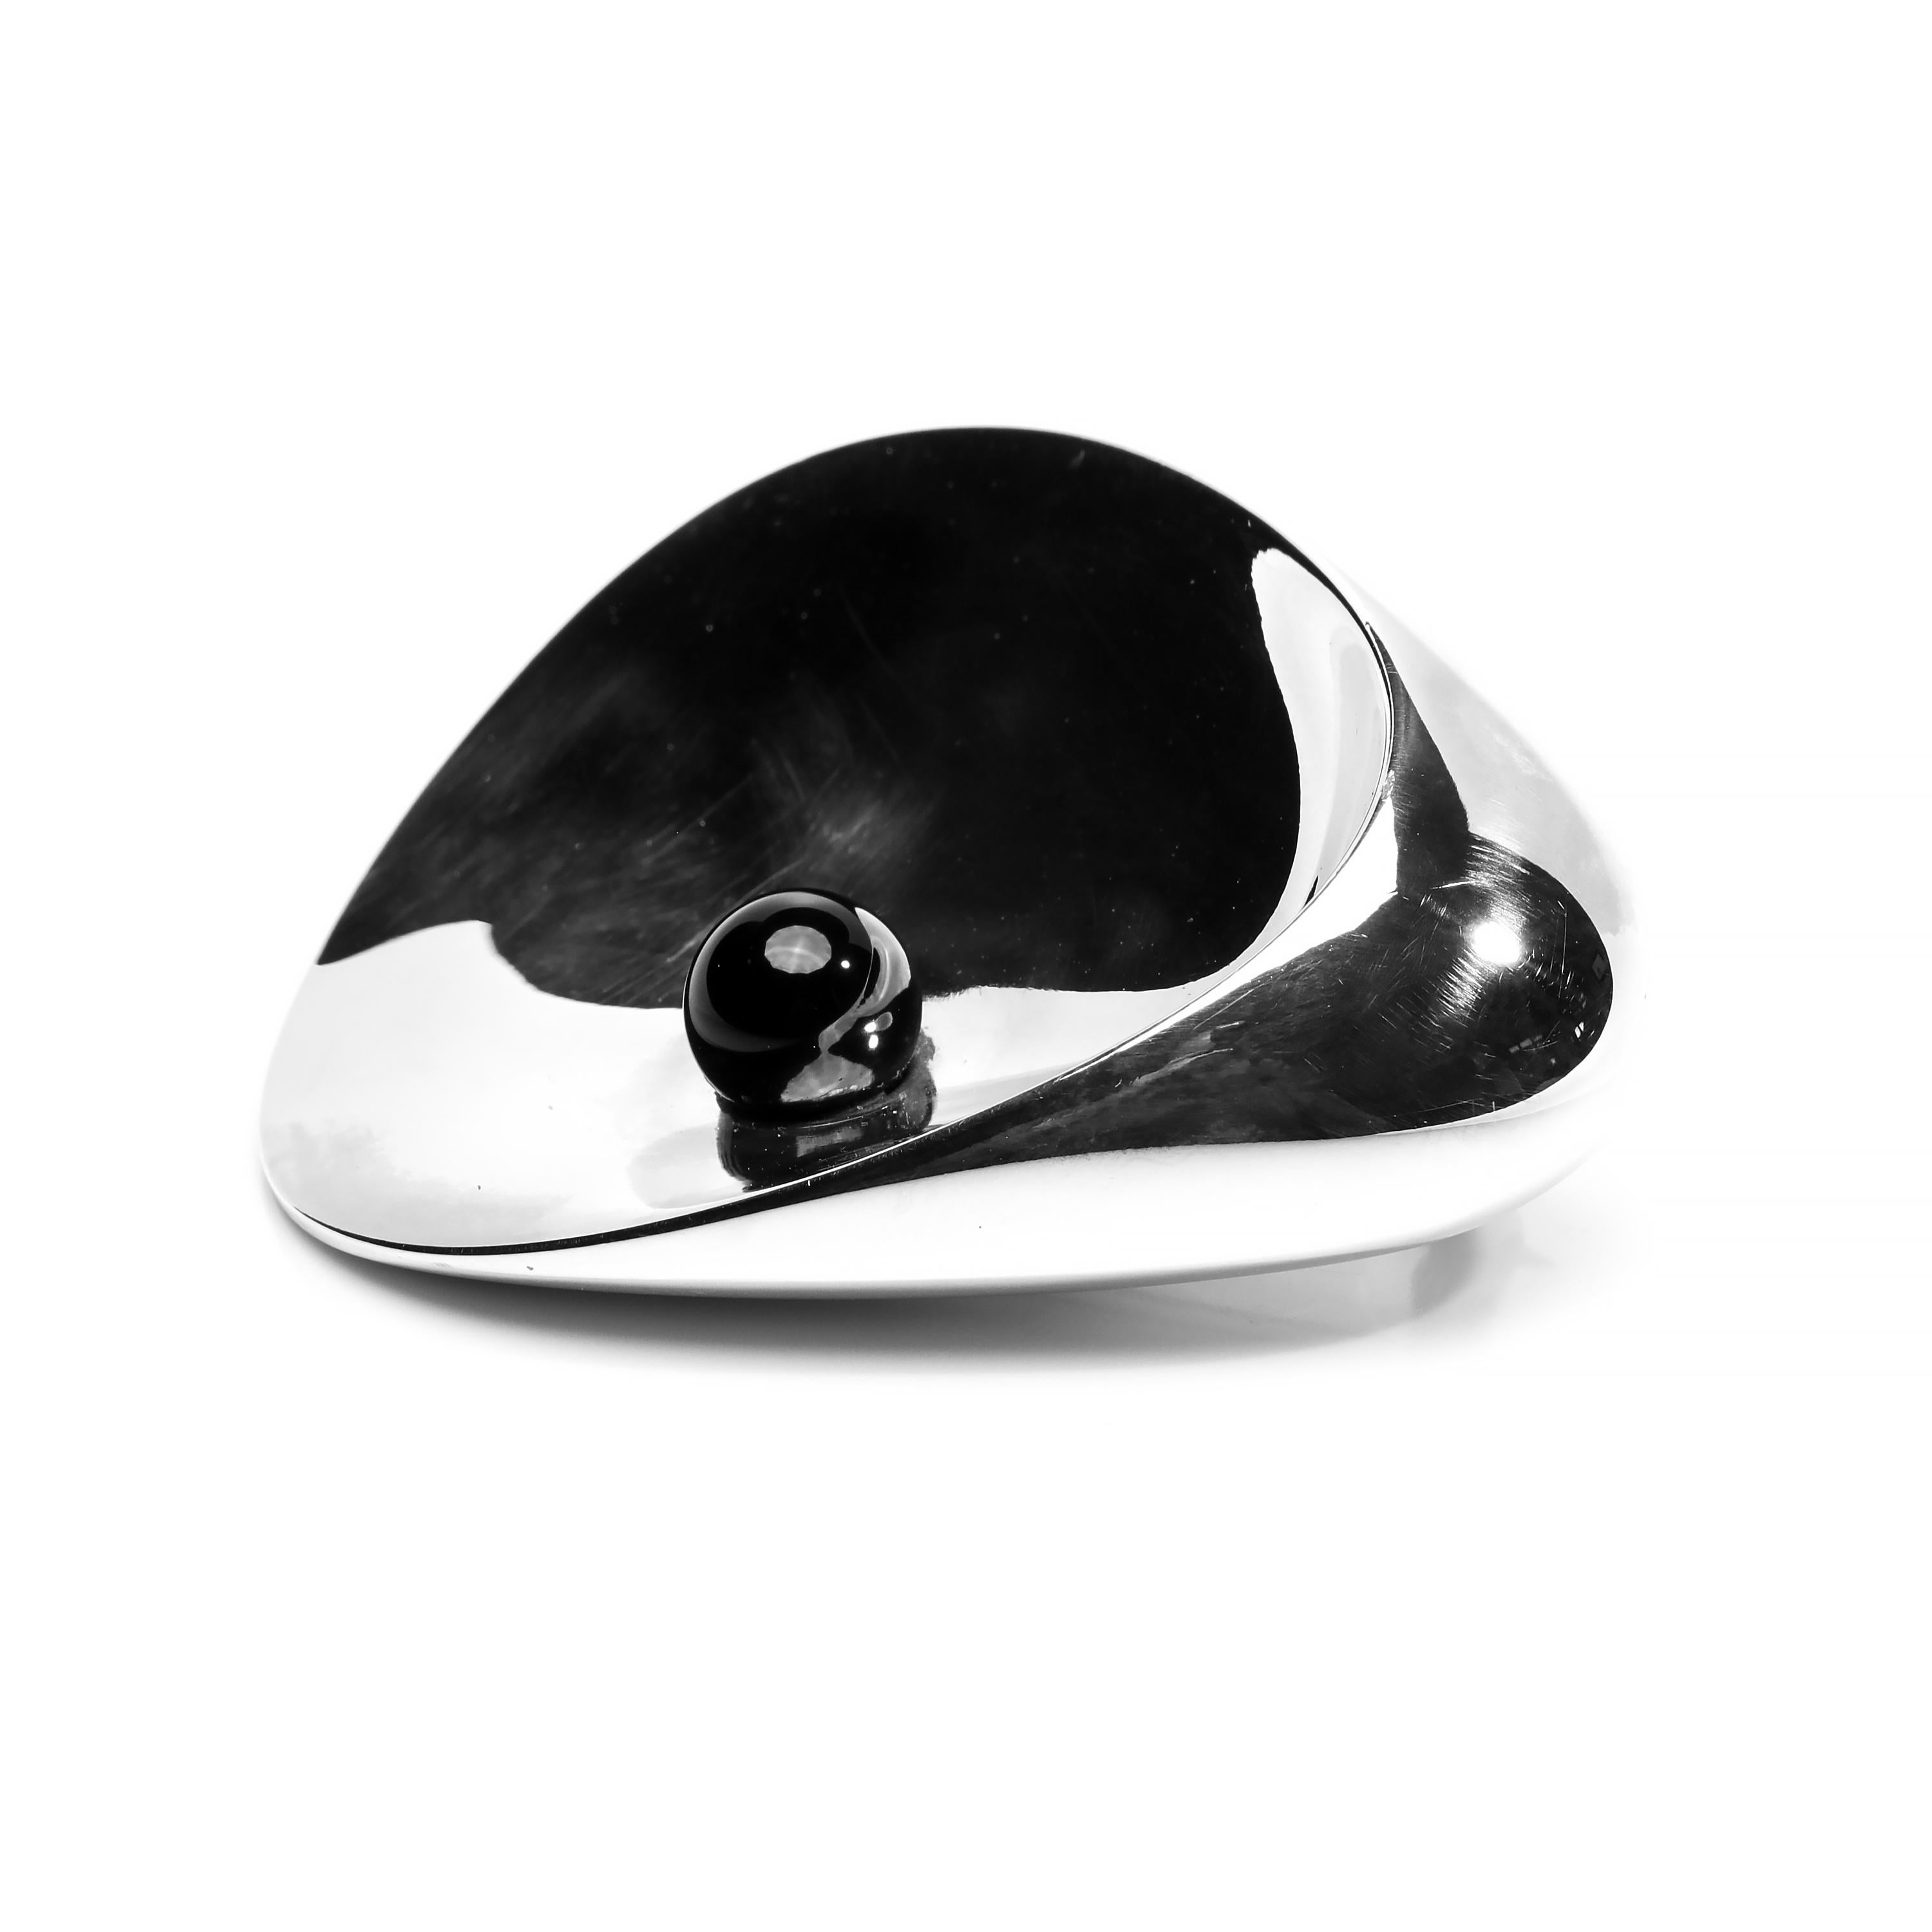 This magnificent and brilliantly simple silver and onyx brooch was created in the 1950s for the firm for Georg Jensen by Nanna and Jørgen Ditzel. The wife and husband design team created spectacular pieces of furniture including the iconic “Hanging